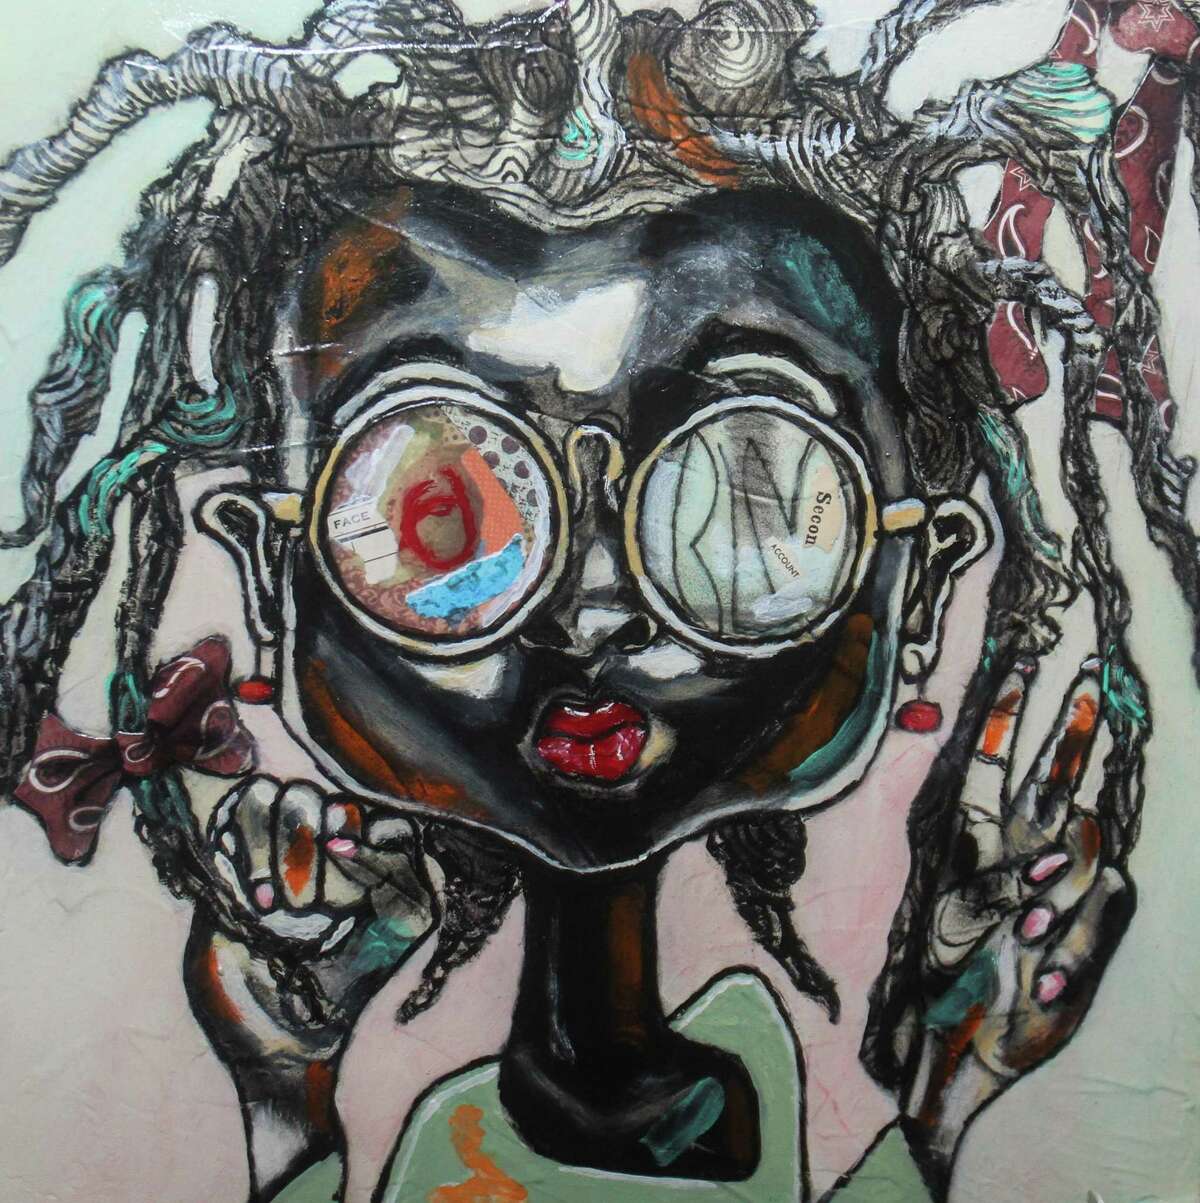 "Lil’ Maddie" by Romero Robinson one of a selection of 12" x 12" works of art presented for purchase, displayed at the Glassell Art Auction at the Glassell School of Art in Houston on June 24, 2021.